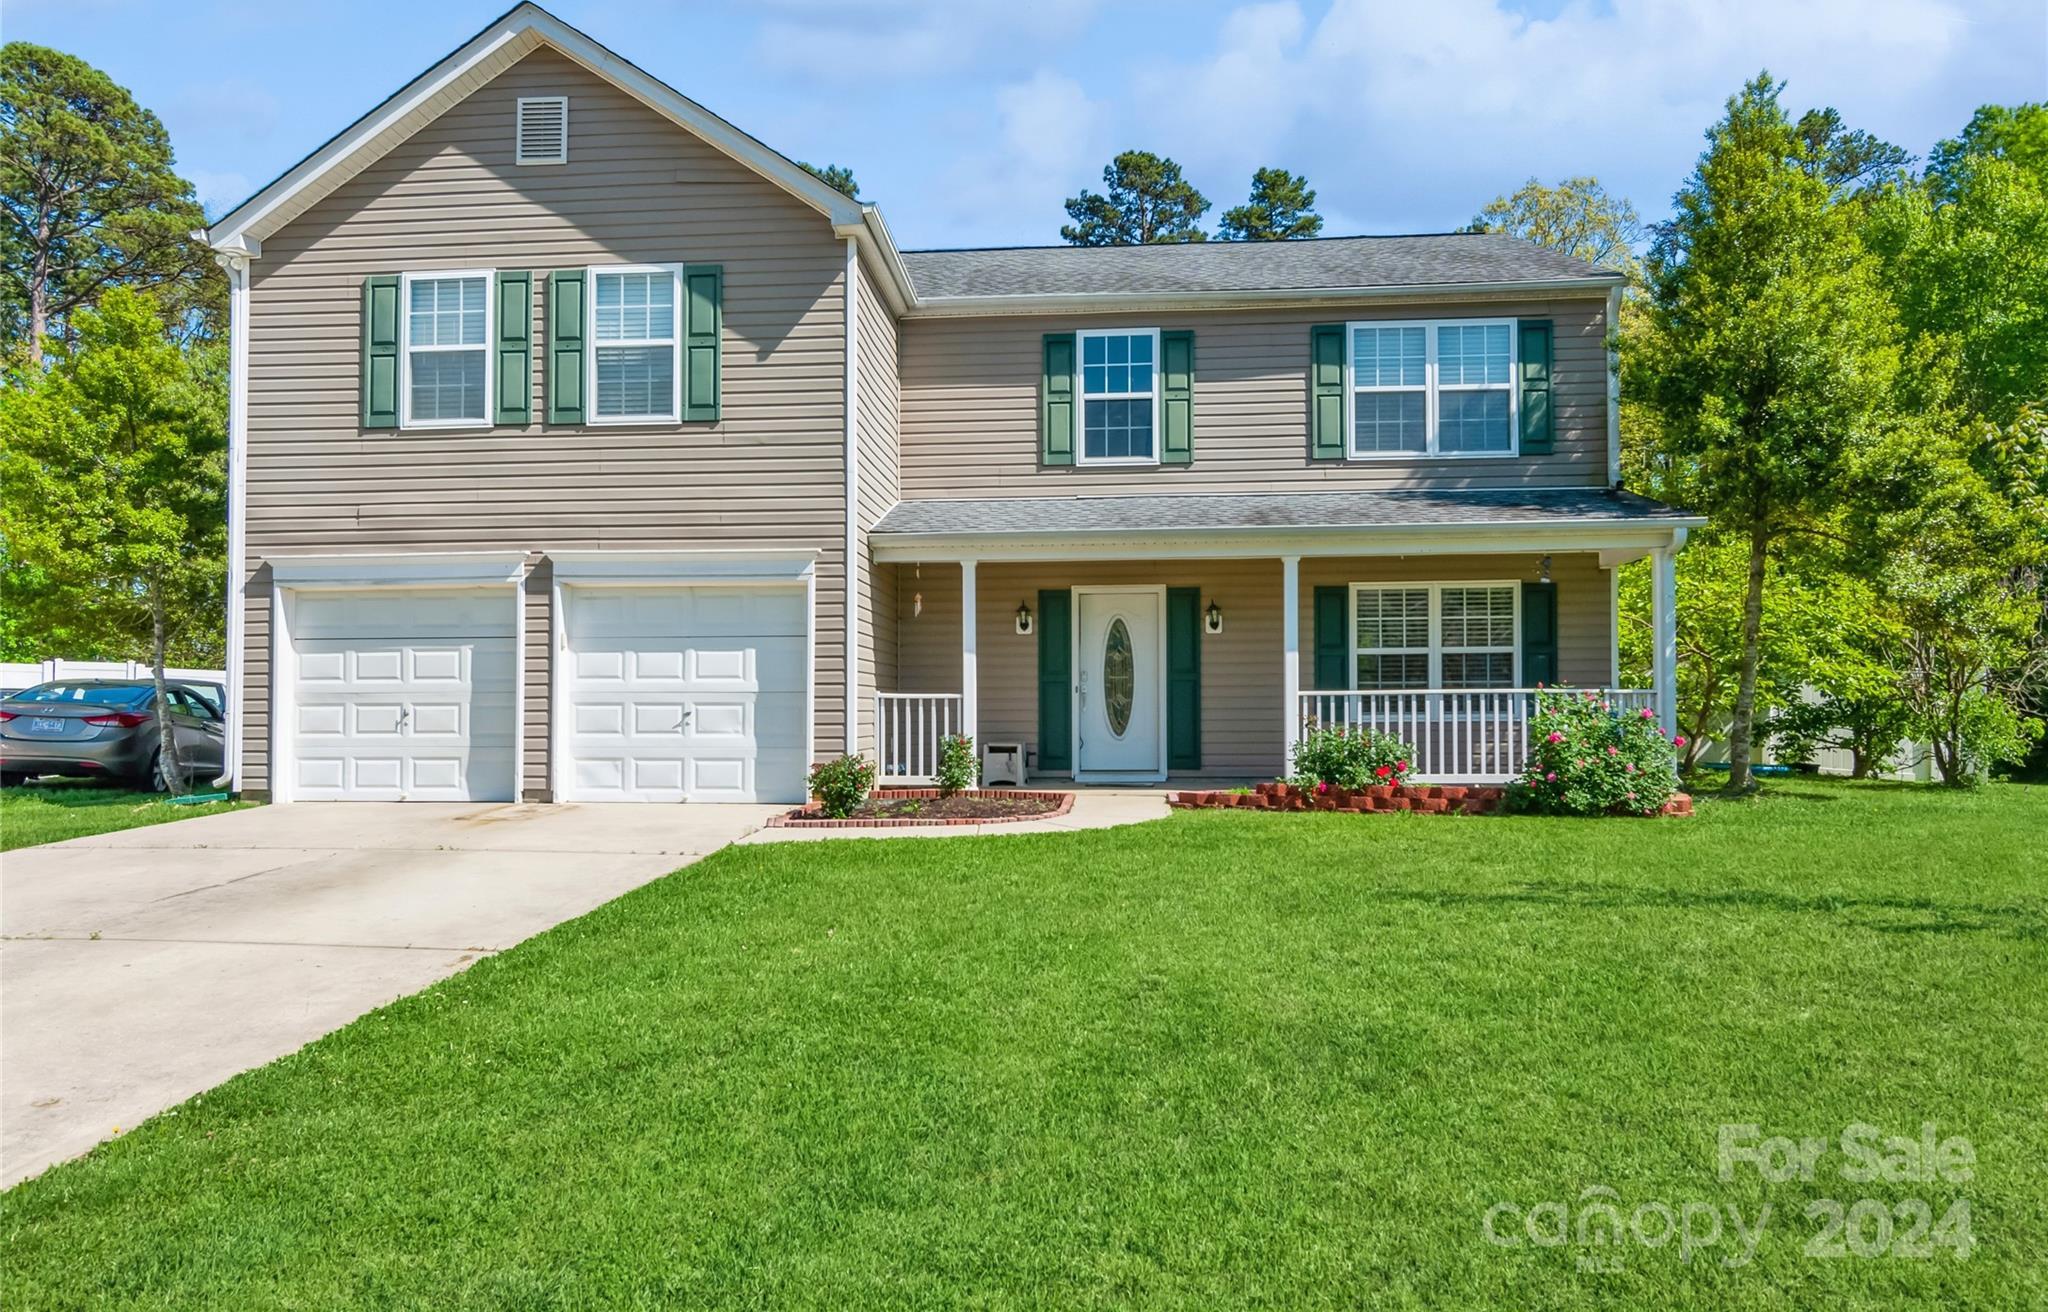 Photo one of 4110 Edgeview Dr Indian Trail NC 28079 | MLS 4129093